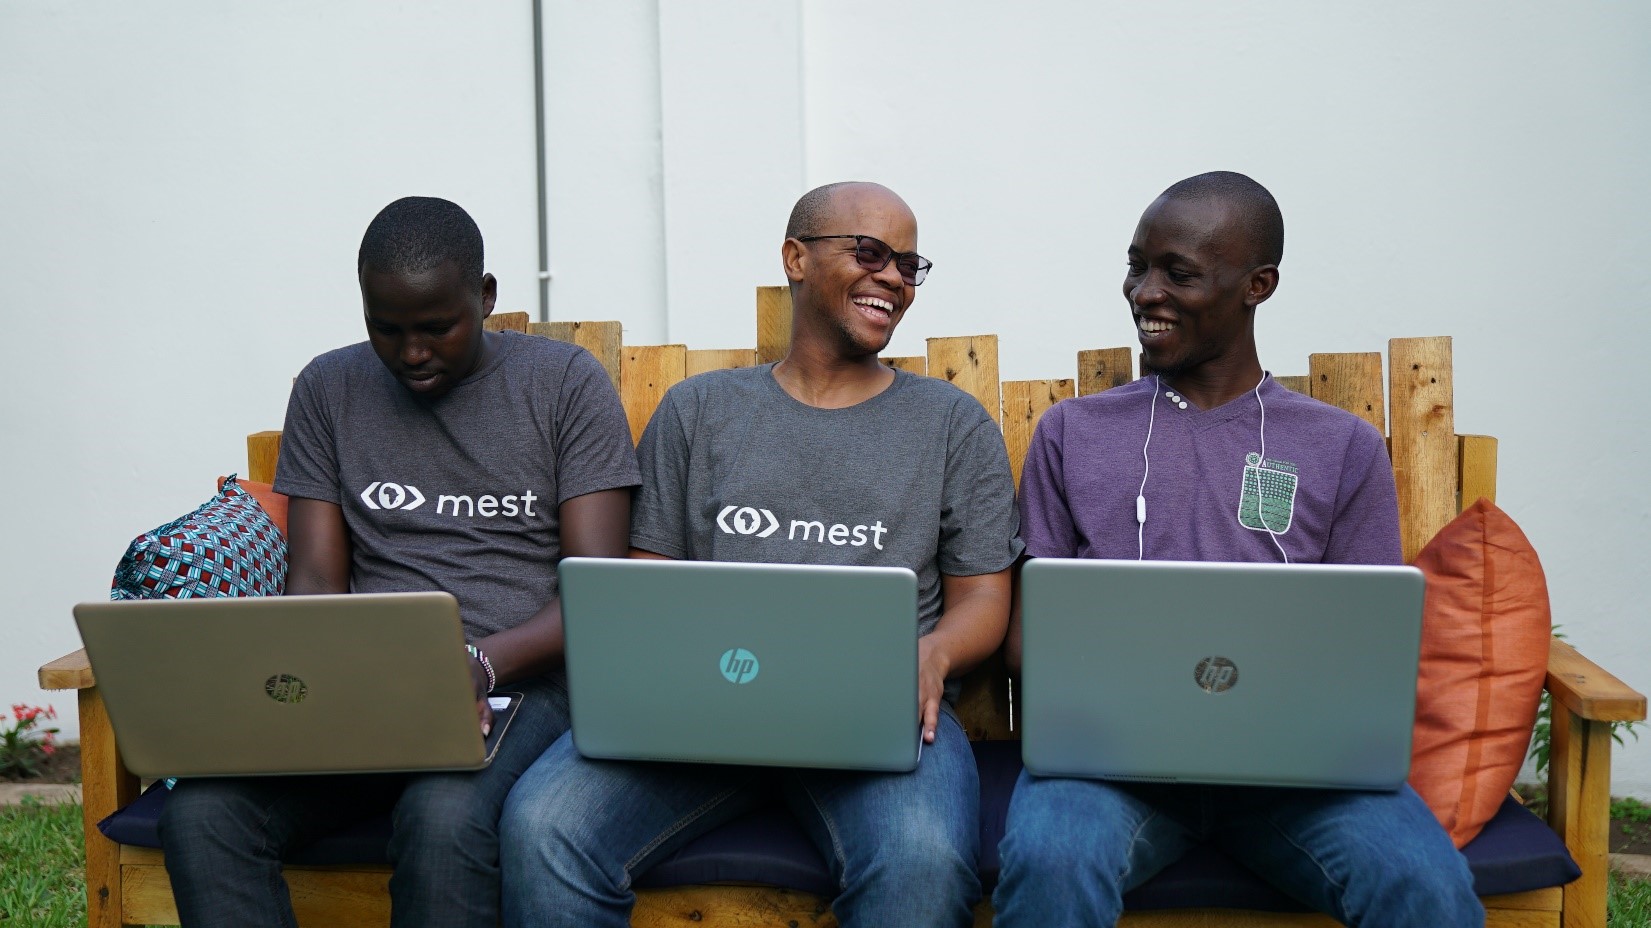 Meltwater Entrepreneurial School of Technology (MEST) Africa: All African can Apply for this Entrepreneurship Program